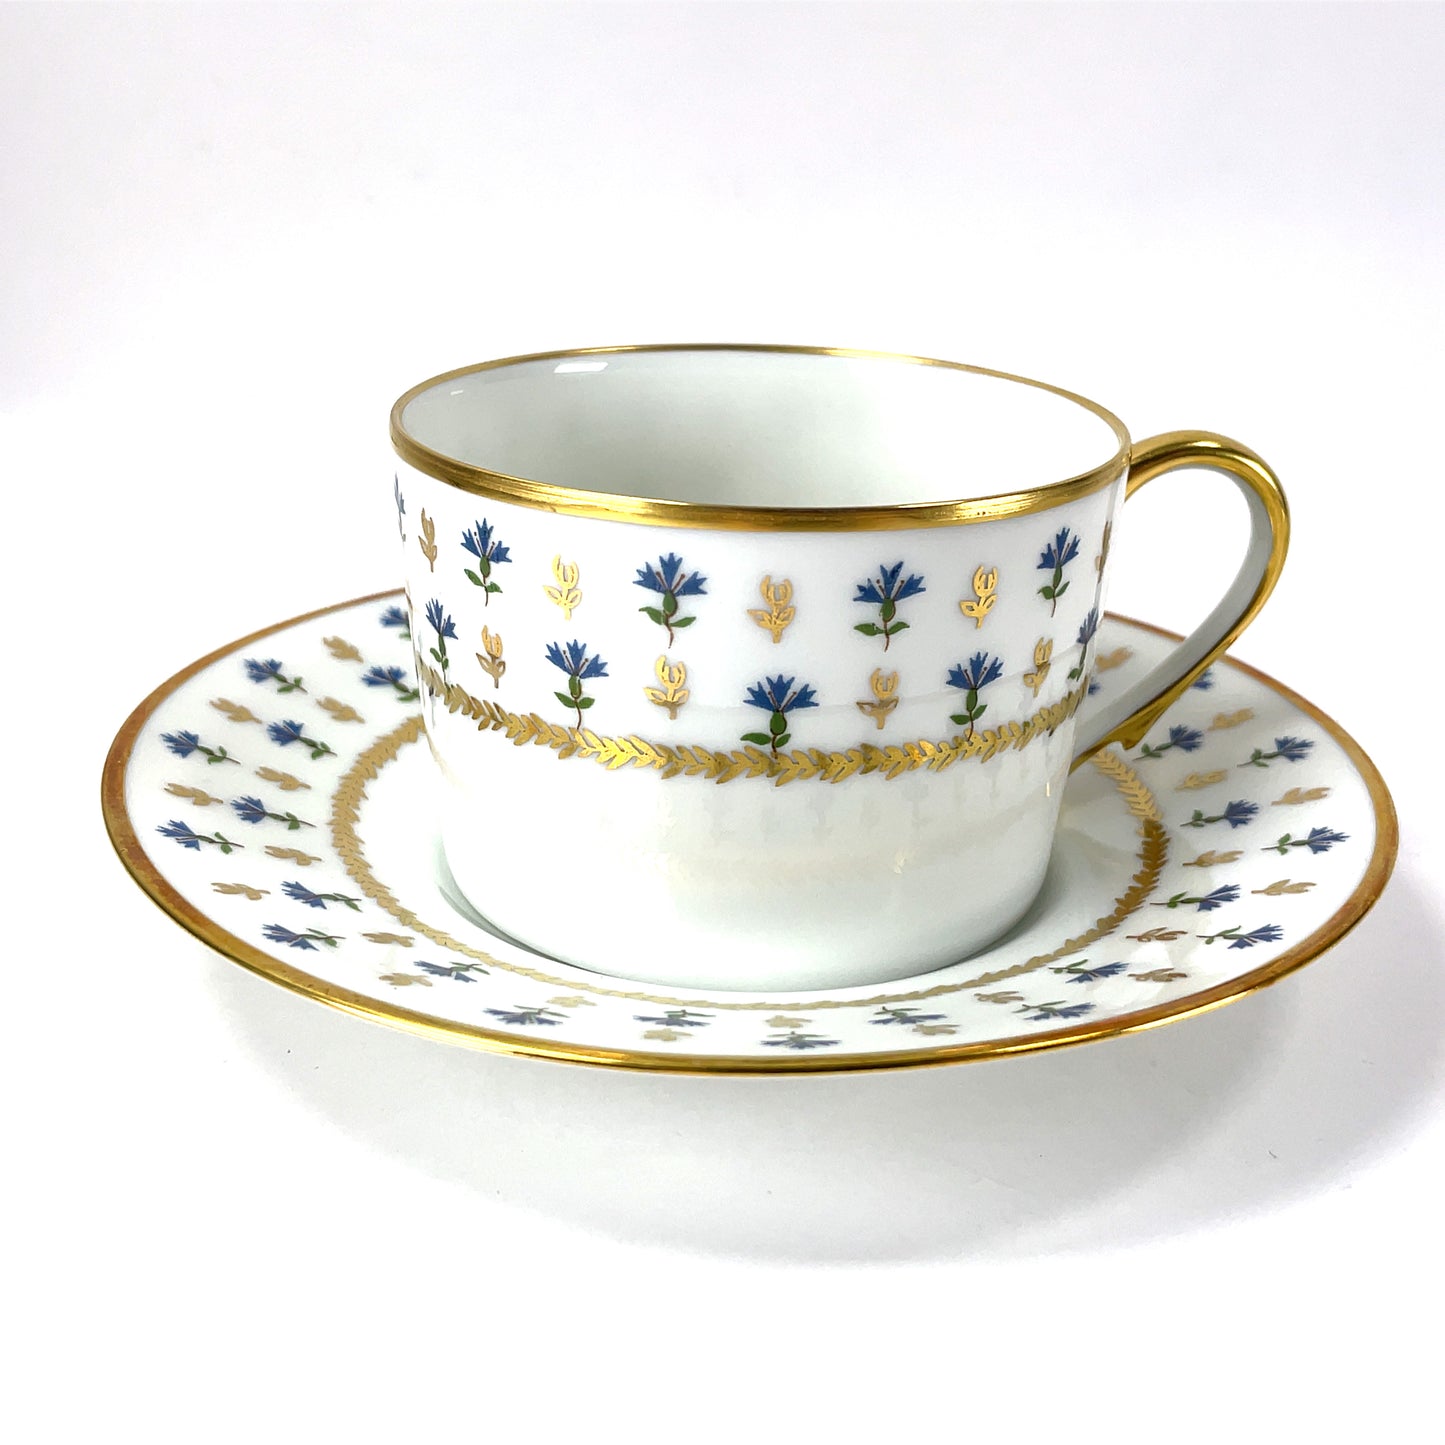 2 x Limoges France Raynaud Vieux-Nyon by Ceralene Cup and Saucer